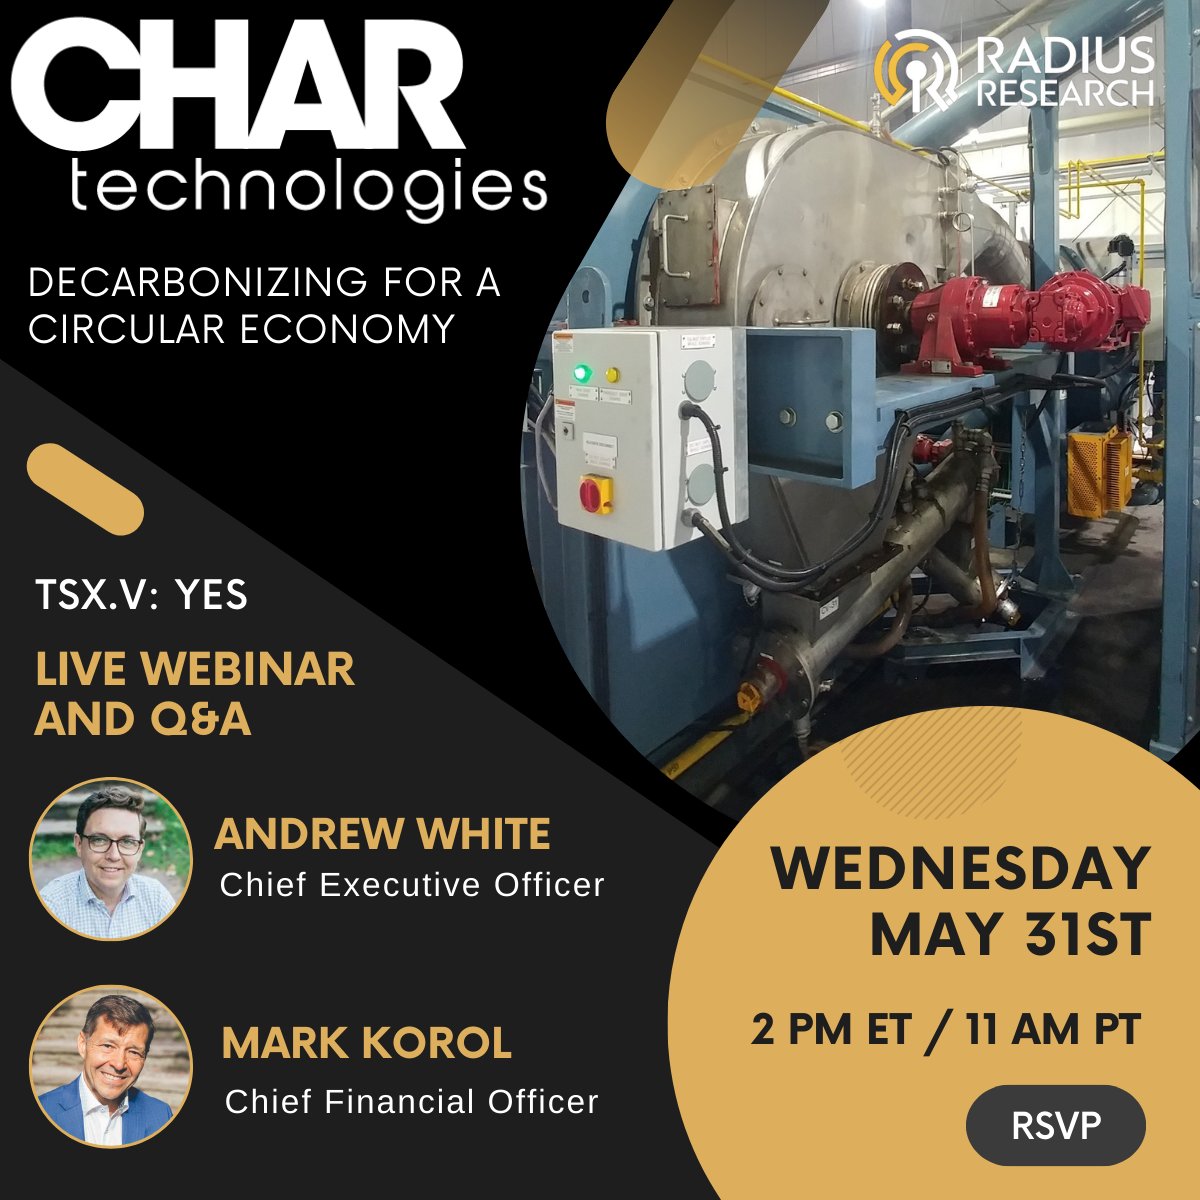 Today at 2PM ET / 11AM PT!

Join us for a Live Webinar and Q&A with @CHAR_Technology CEO Andrew White & CFO Mark Korol

Andrew and Mark will be providing a business update and outlook.

RSVP → bit.ly/42di9NR

$YES #cleantech #RNG #biomass #biocarbons #renewablegas